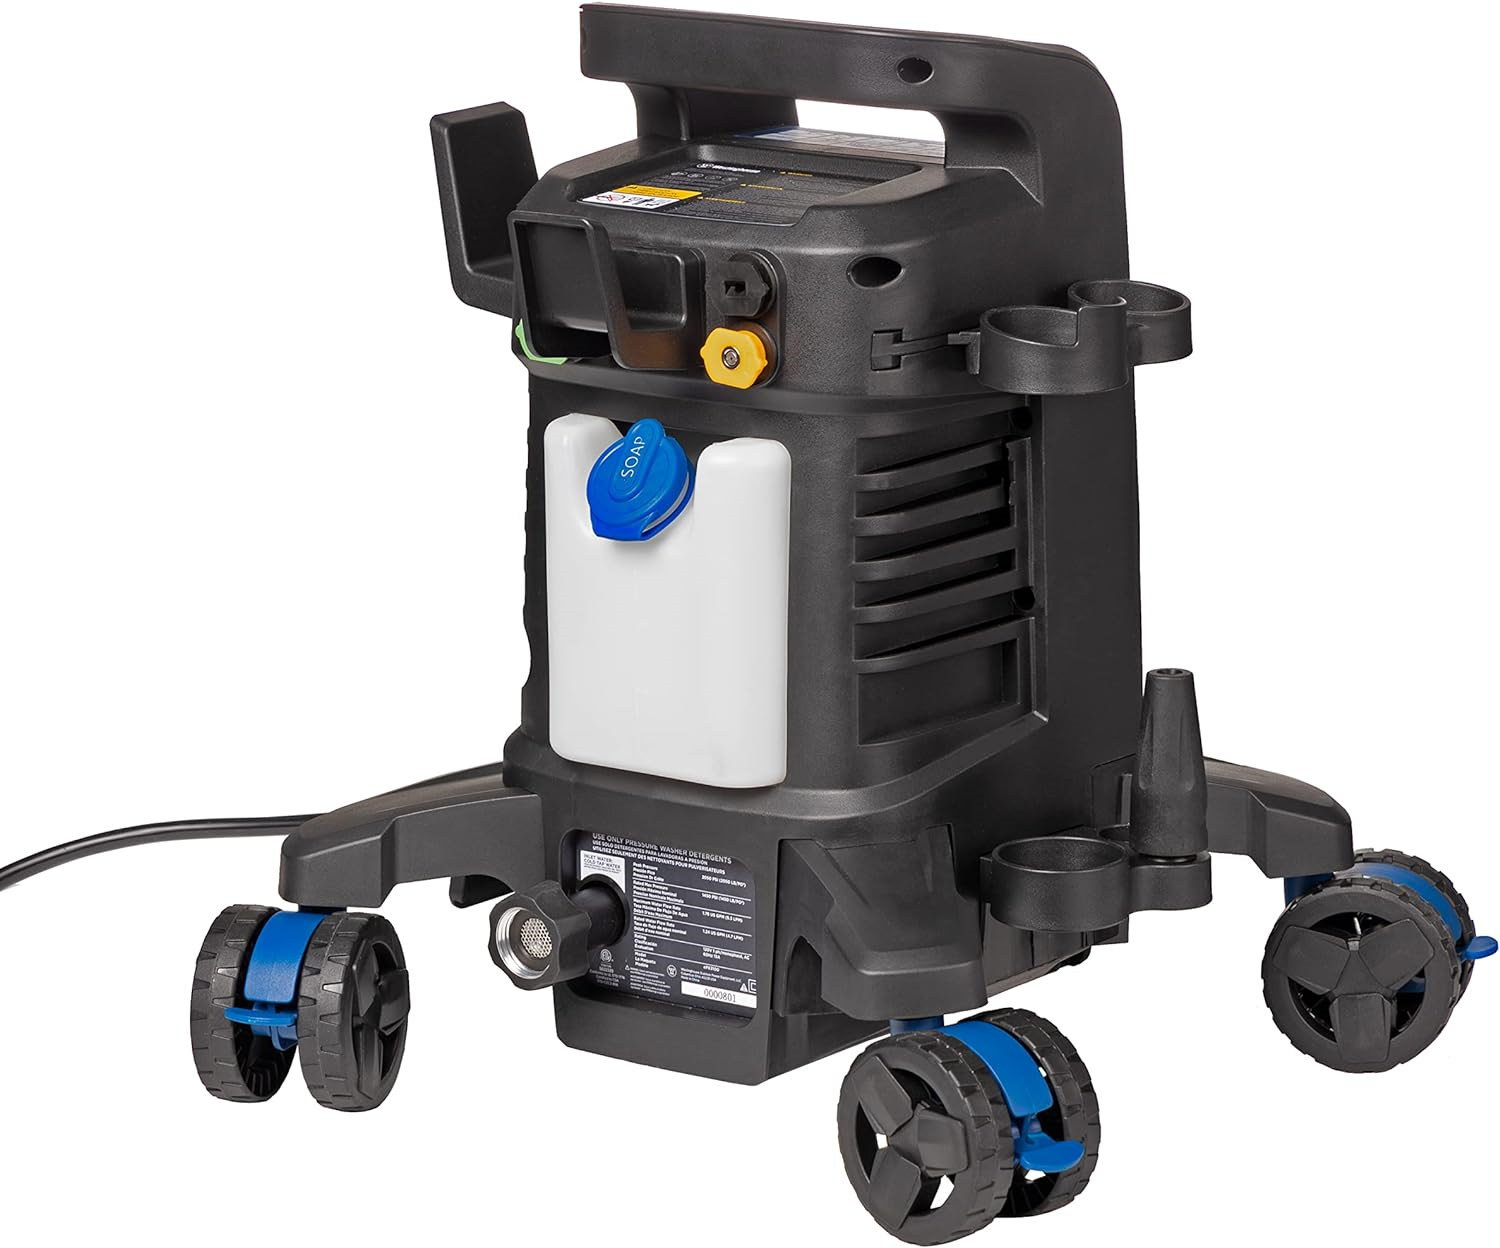 Westinghouse, Westinghouse ePX3500 Electric Pressure Washer 2500 PSI 1.76 GPM New